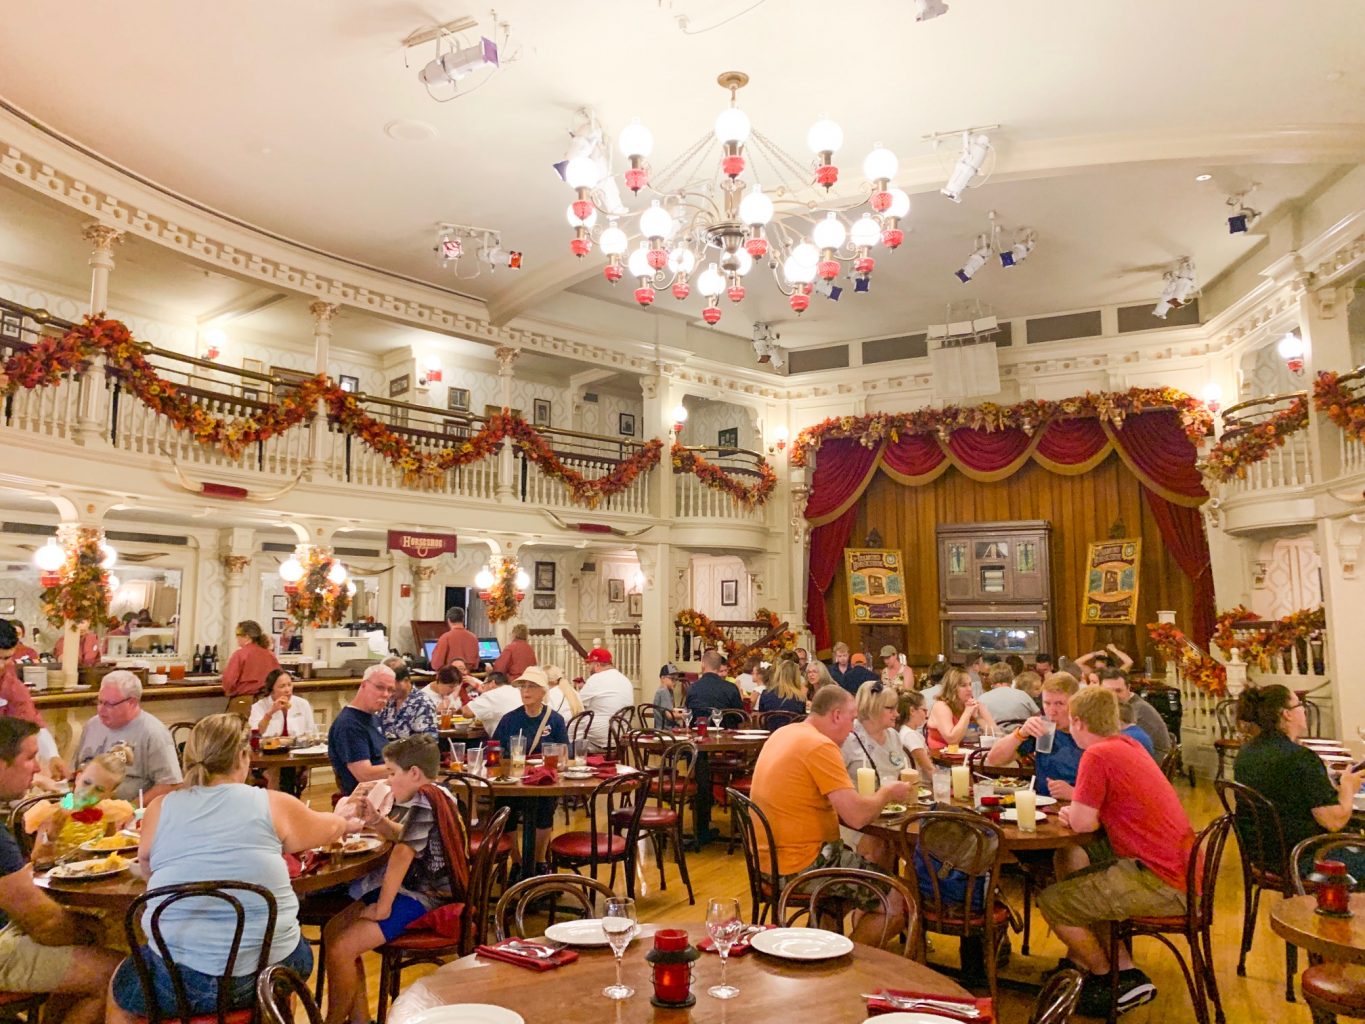 People drinking alcohol with dinner in magic Kingdom 